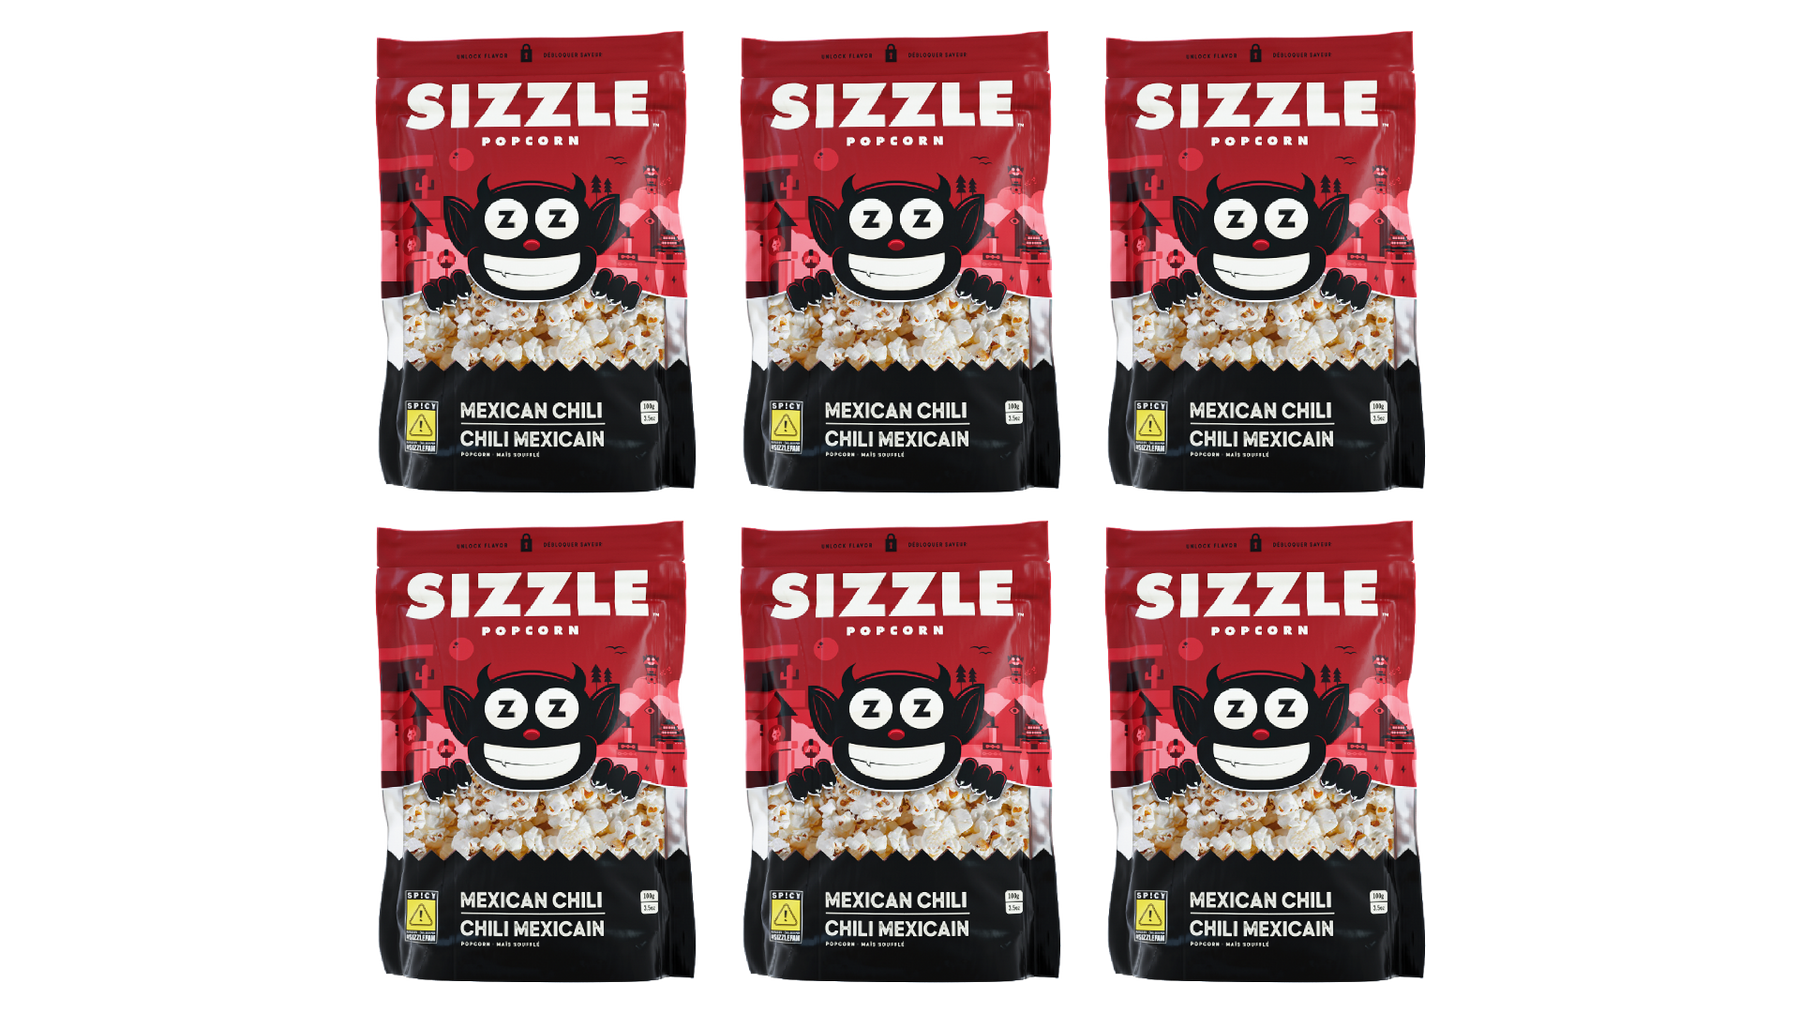 Mexican Chili Sizzle 6-Pack